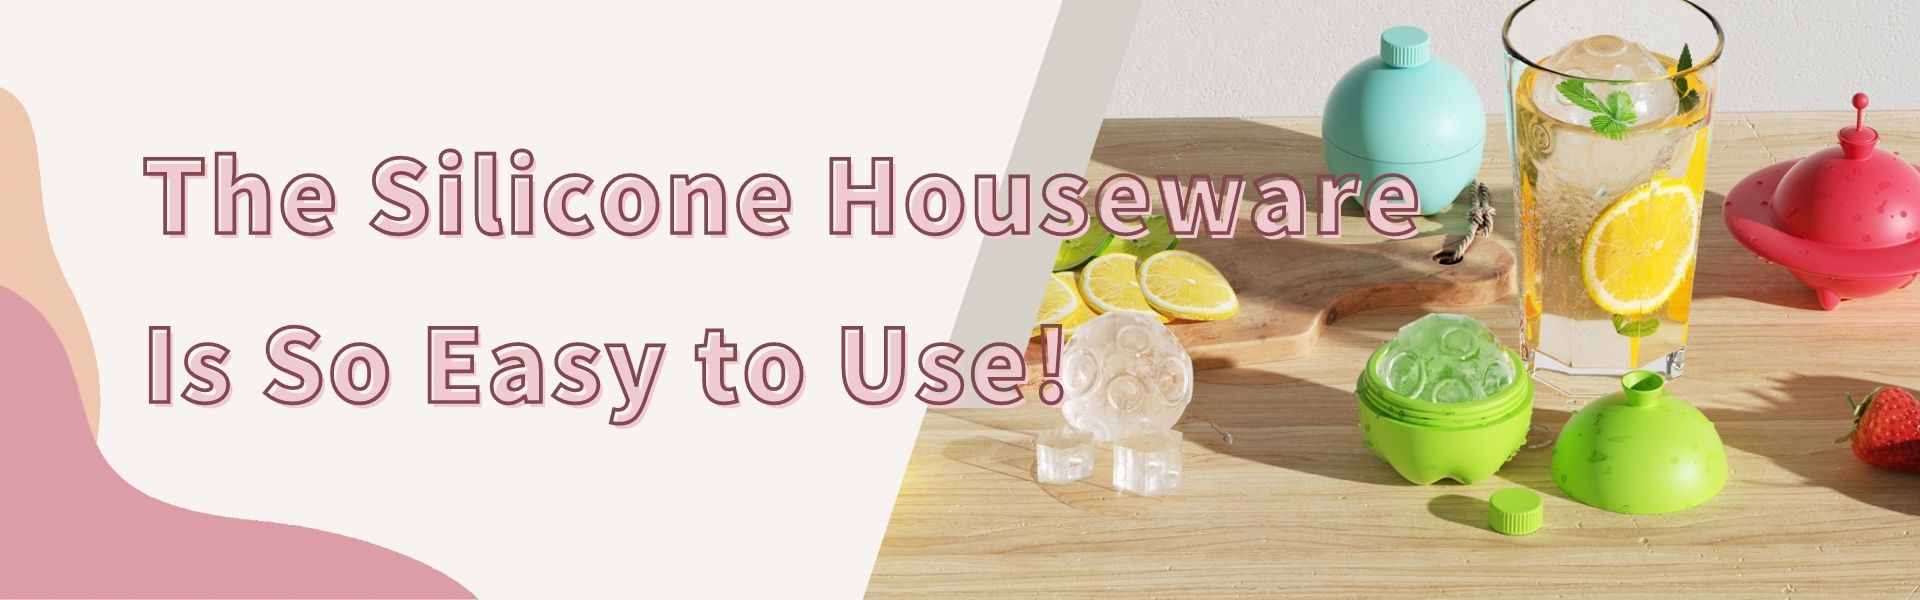 The Silicone Houseware Is So Easy to Use!